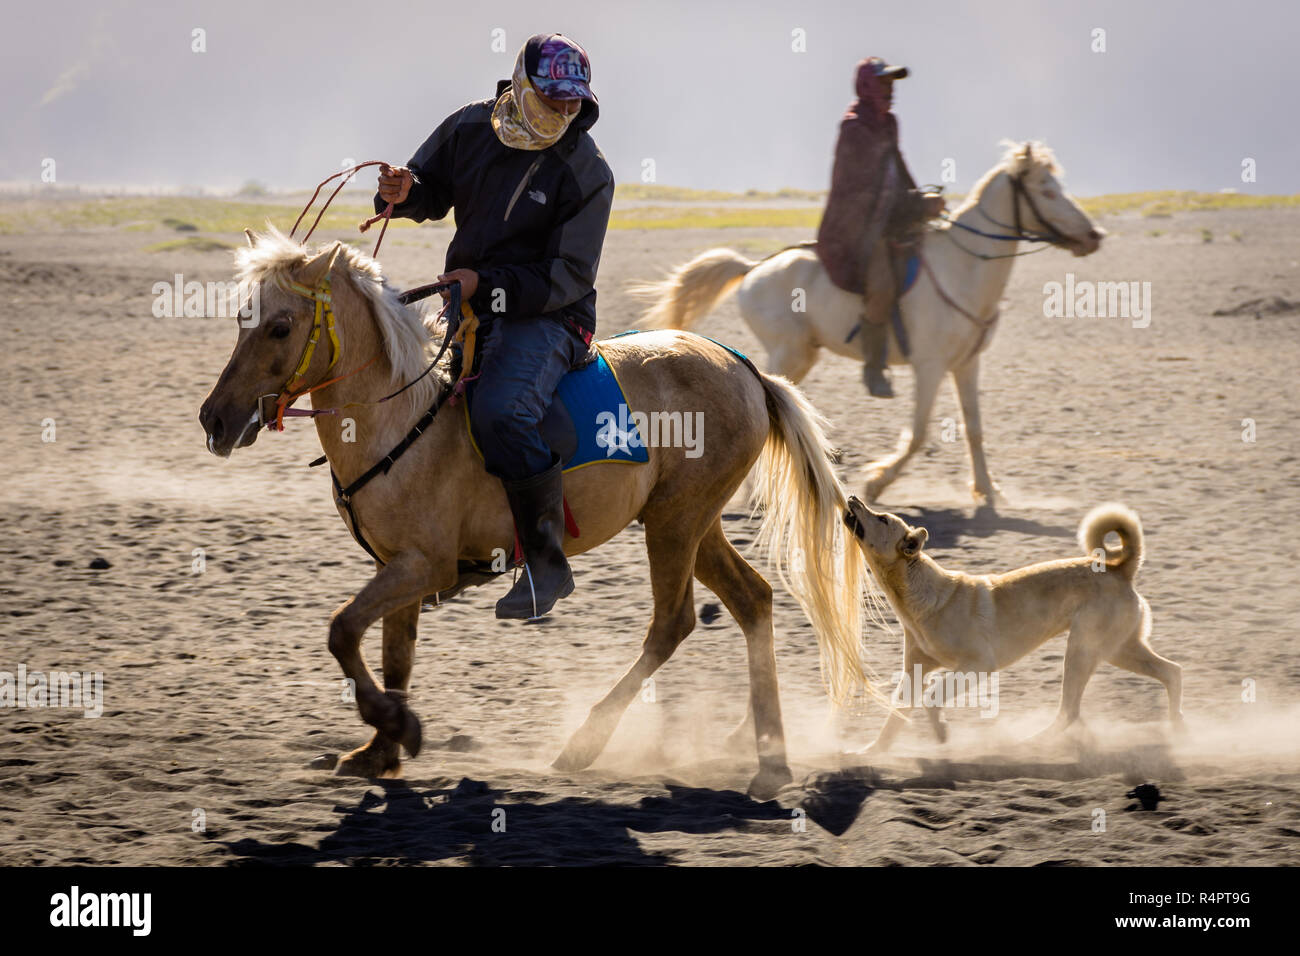 Bromo, Indonesia - June 15th, 2018 : A dog chases and bites the horse tail of a horse rider at Bromo Stock Photo